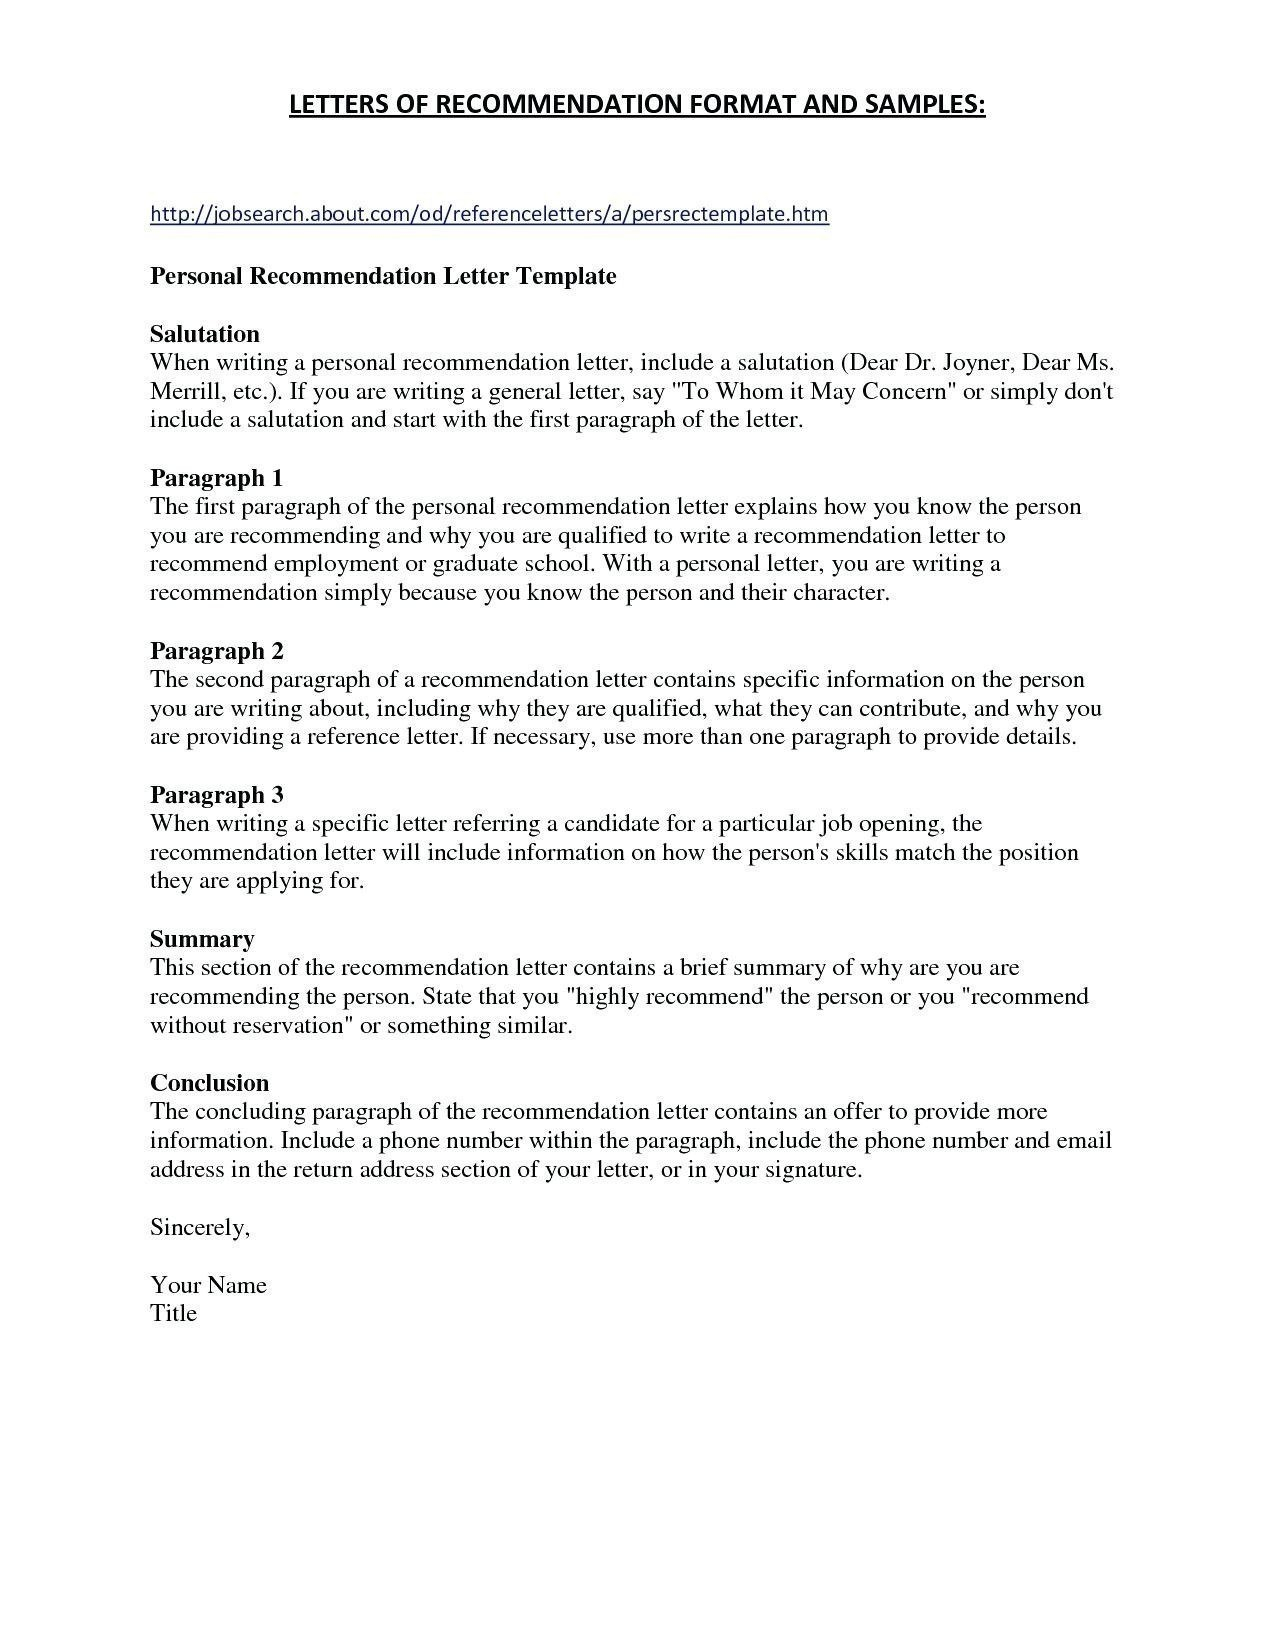 Sample Template For Letter Of Recommendation Collection with regard to Audit Findings Report Template